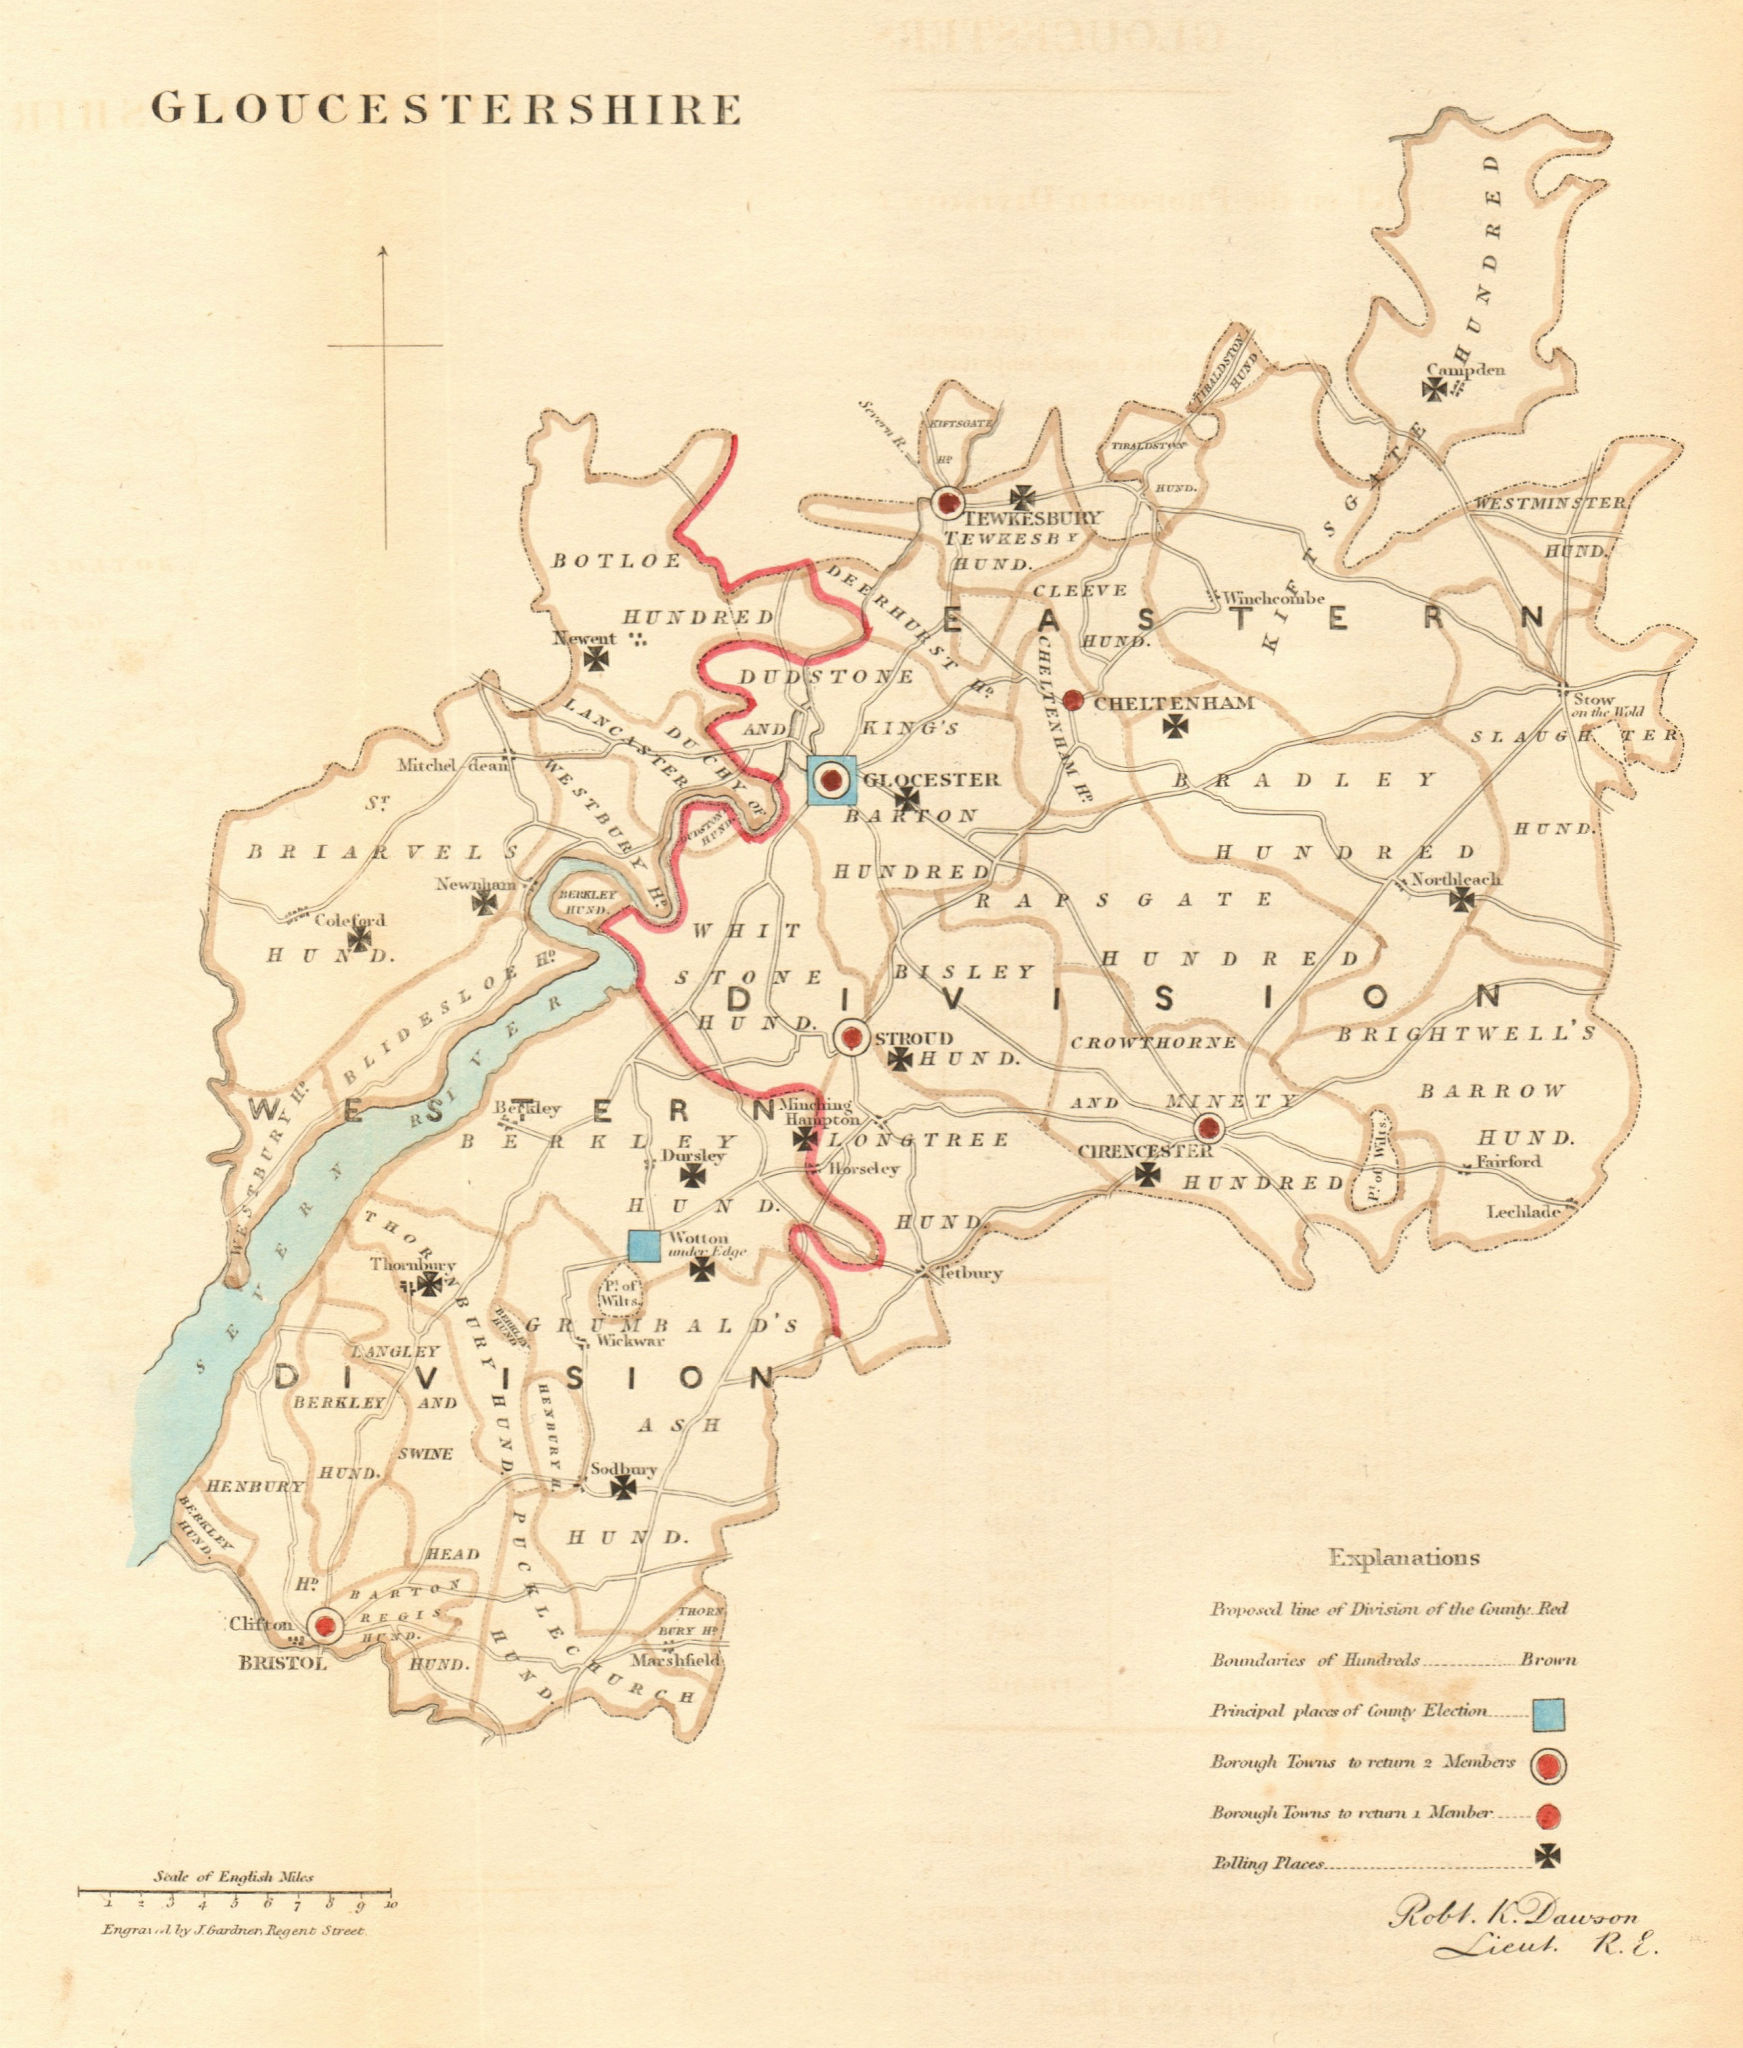 Gloucestershire county map. Divisions boroughs electoral REFORM ACT. DAWSON 1832